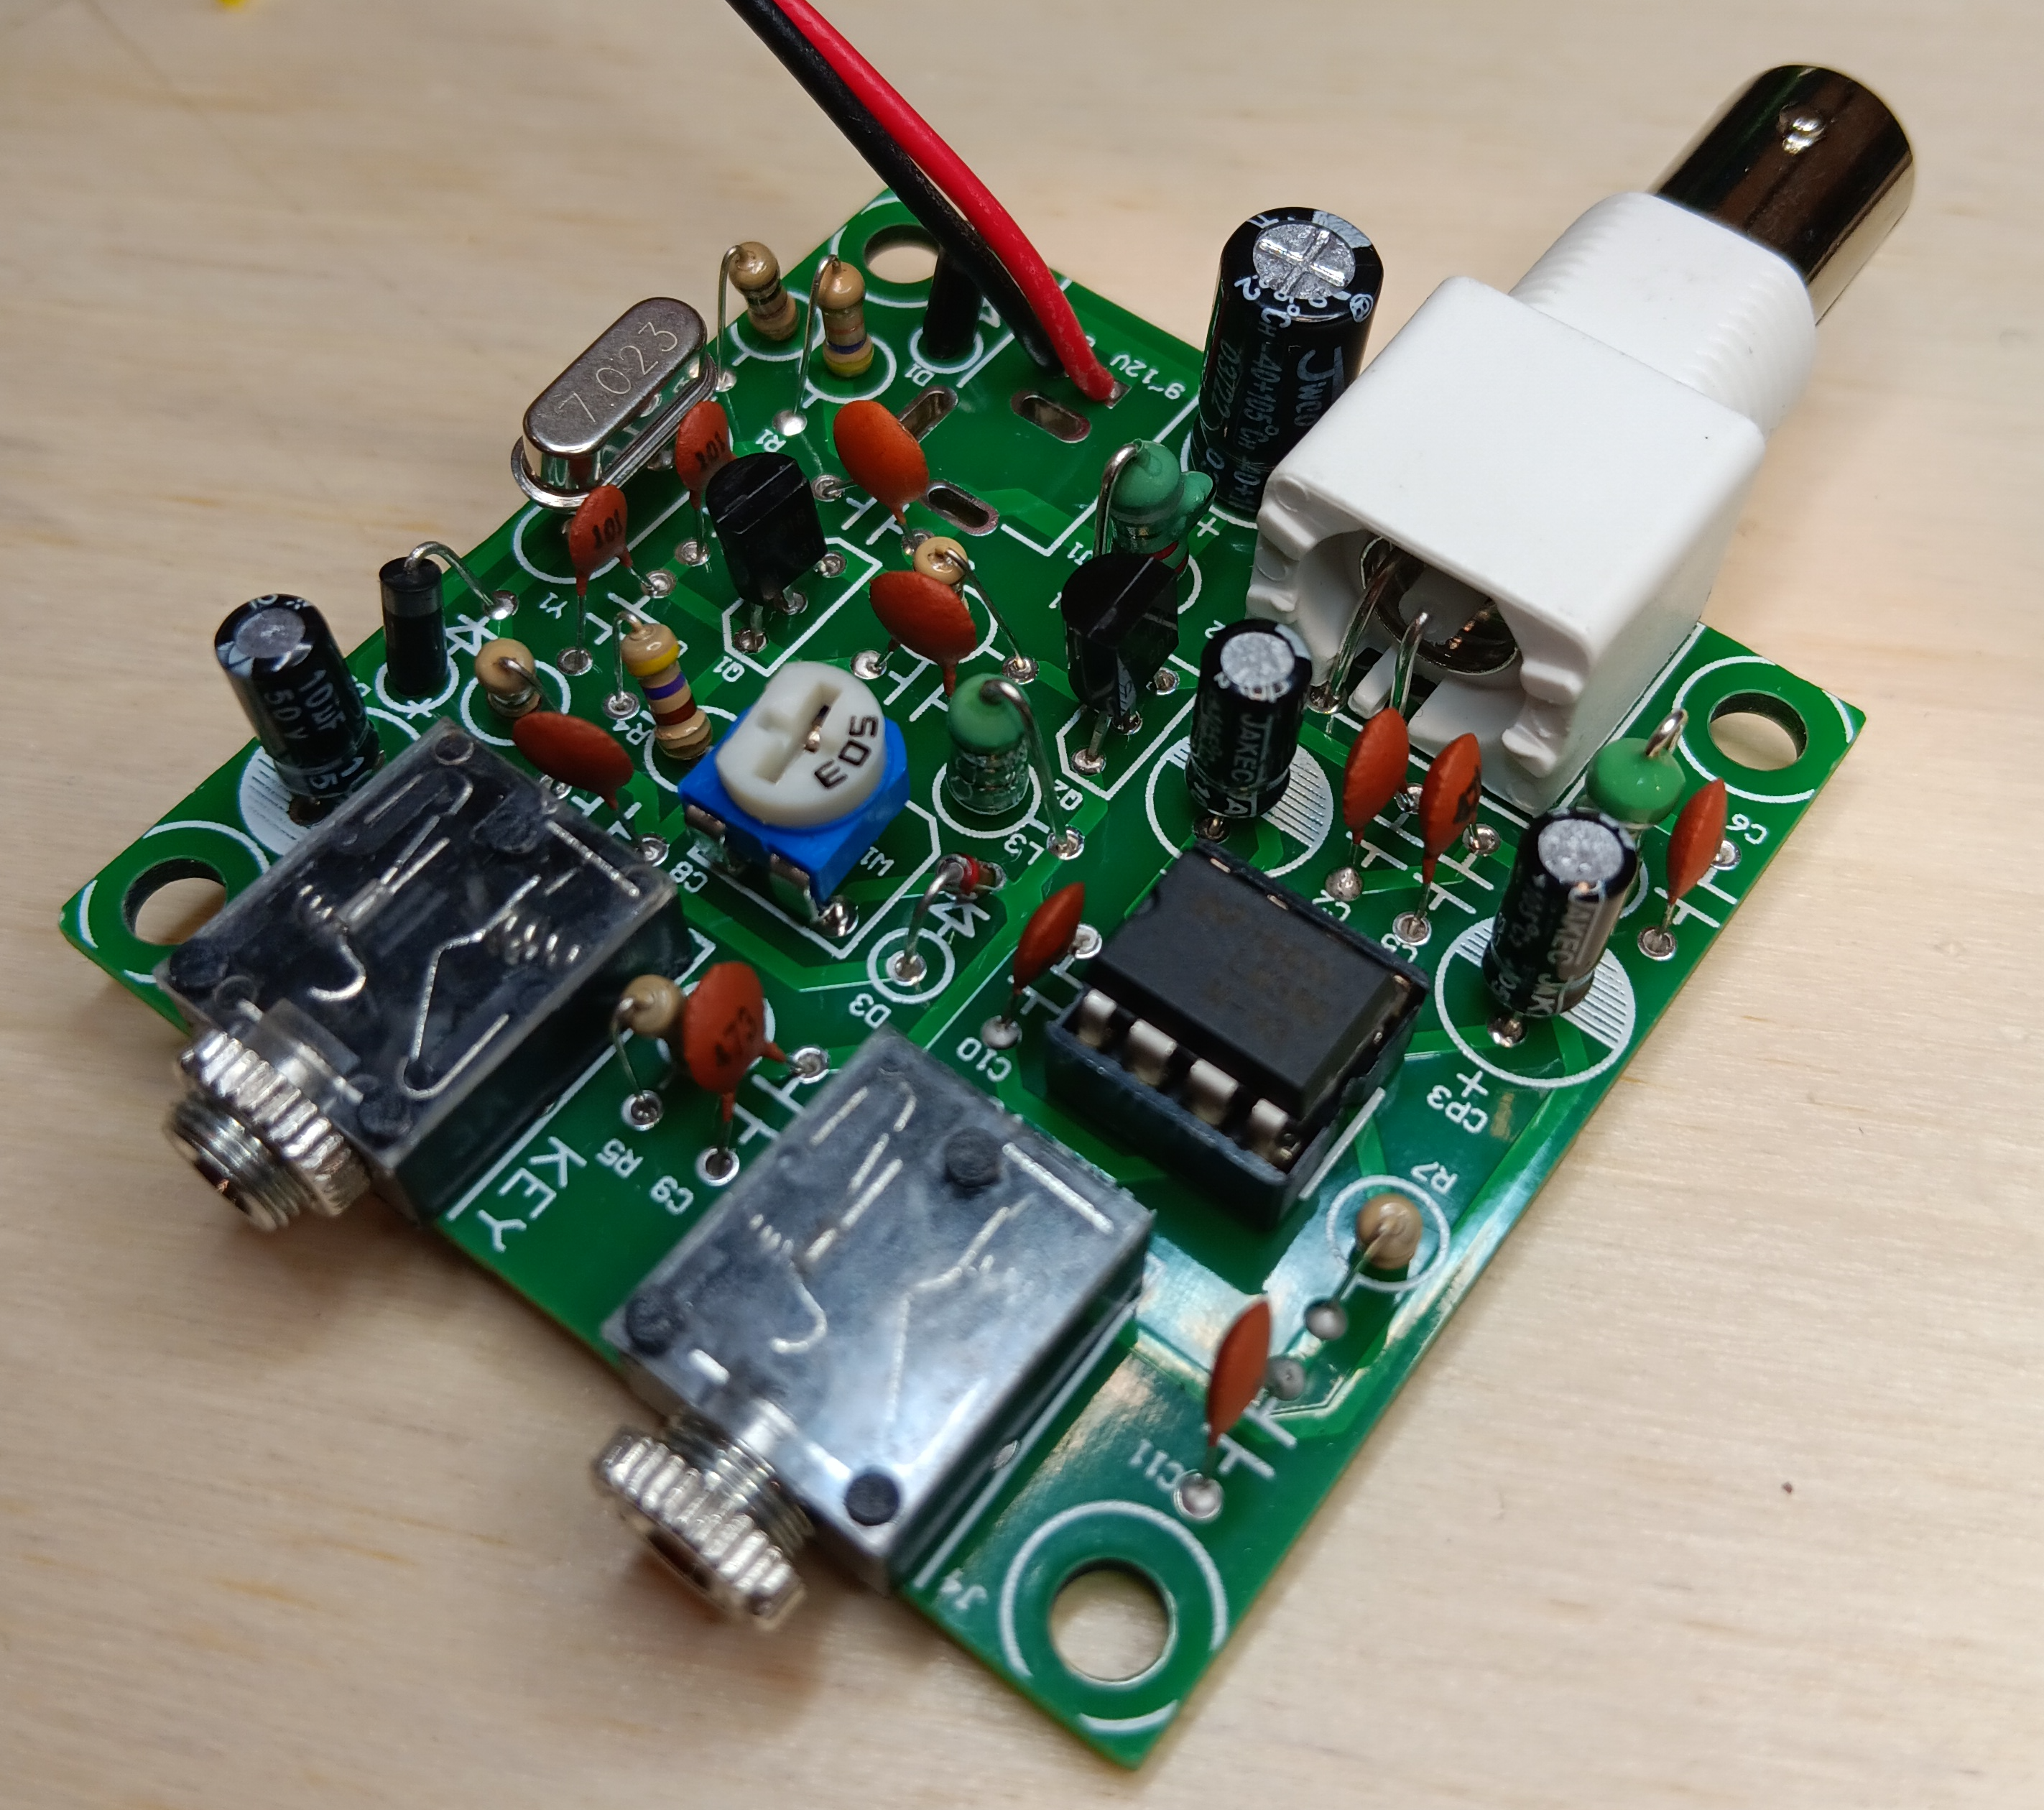 Photo of a Pixie transceiver kit that I assembled. Lots of through-hole parts on a small circuit board. I replaced the supplied barrel power connector with a 9V battery connector that you can't see the end of.